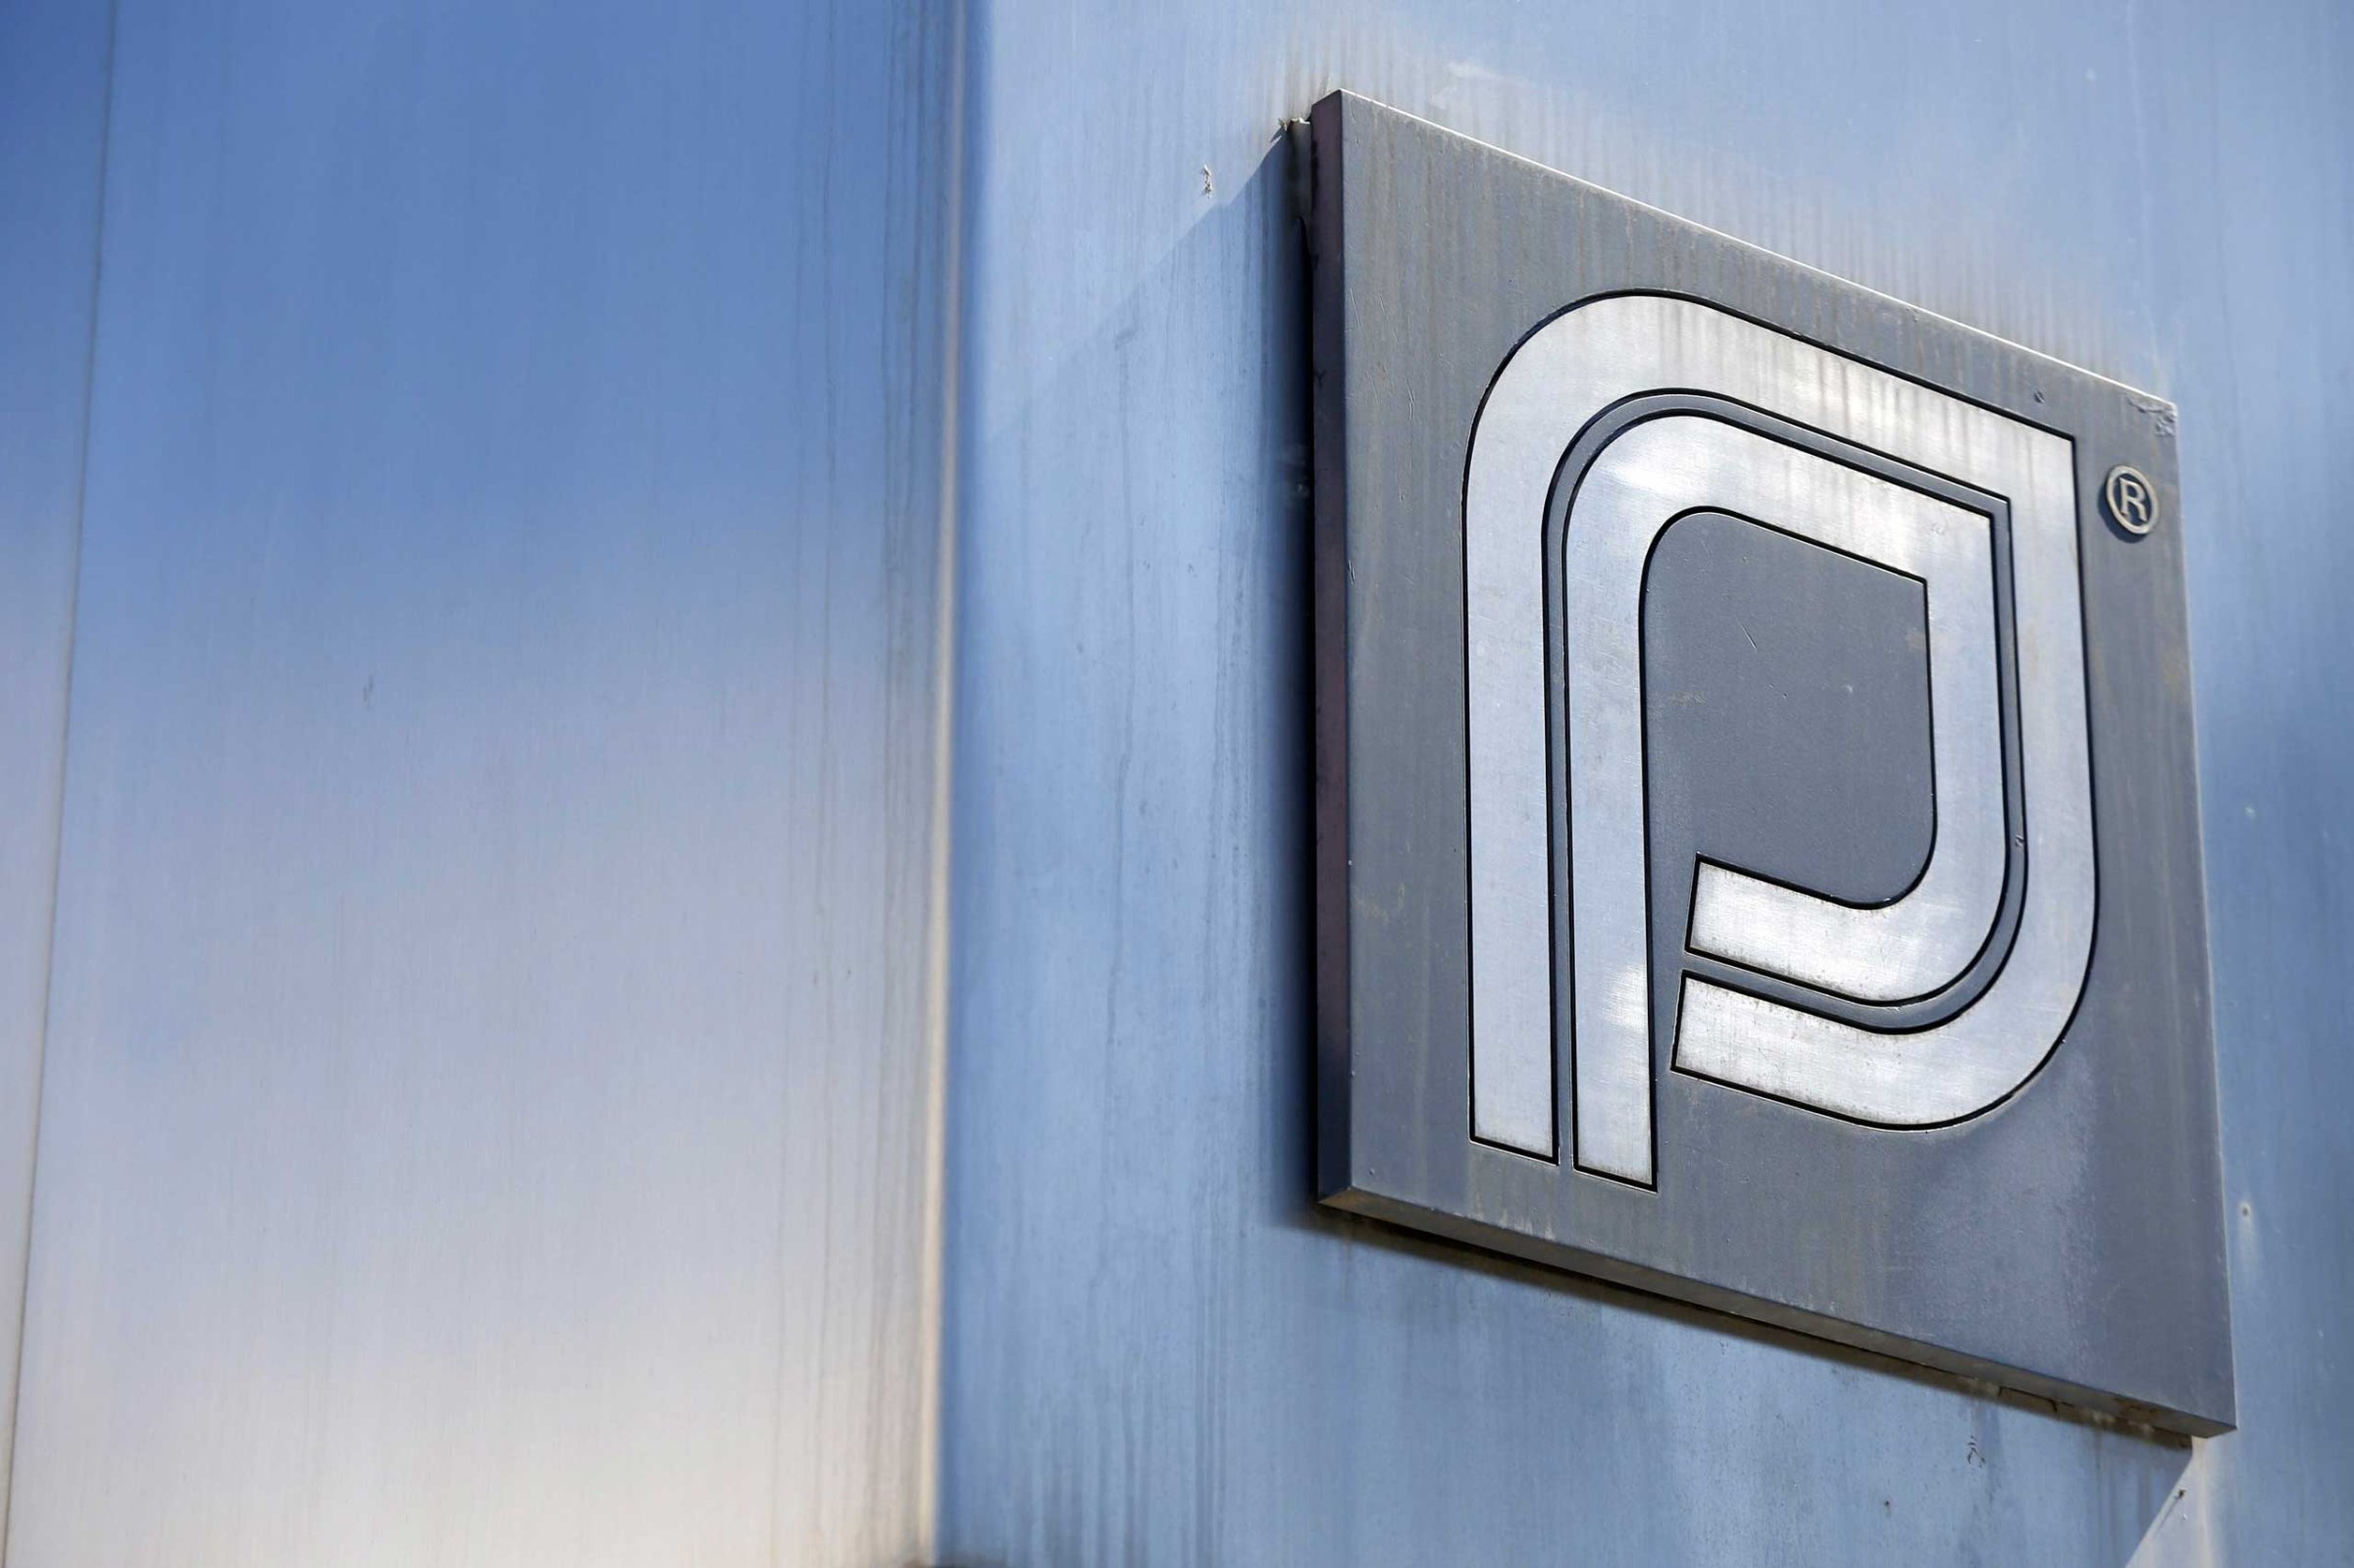 The Planned Parenthood logo